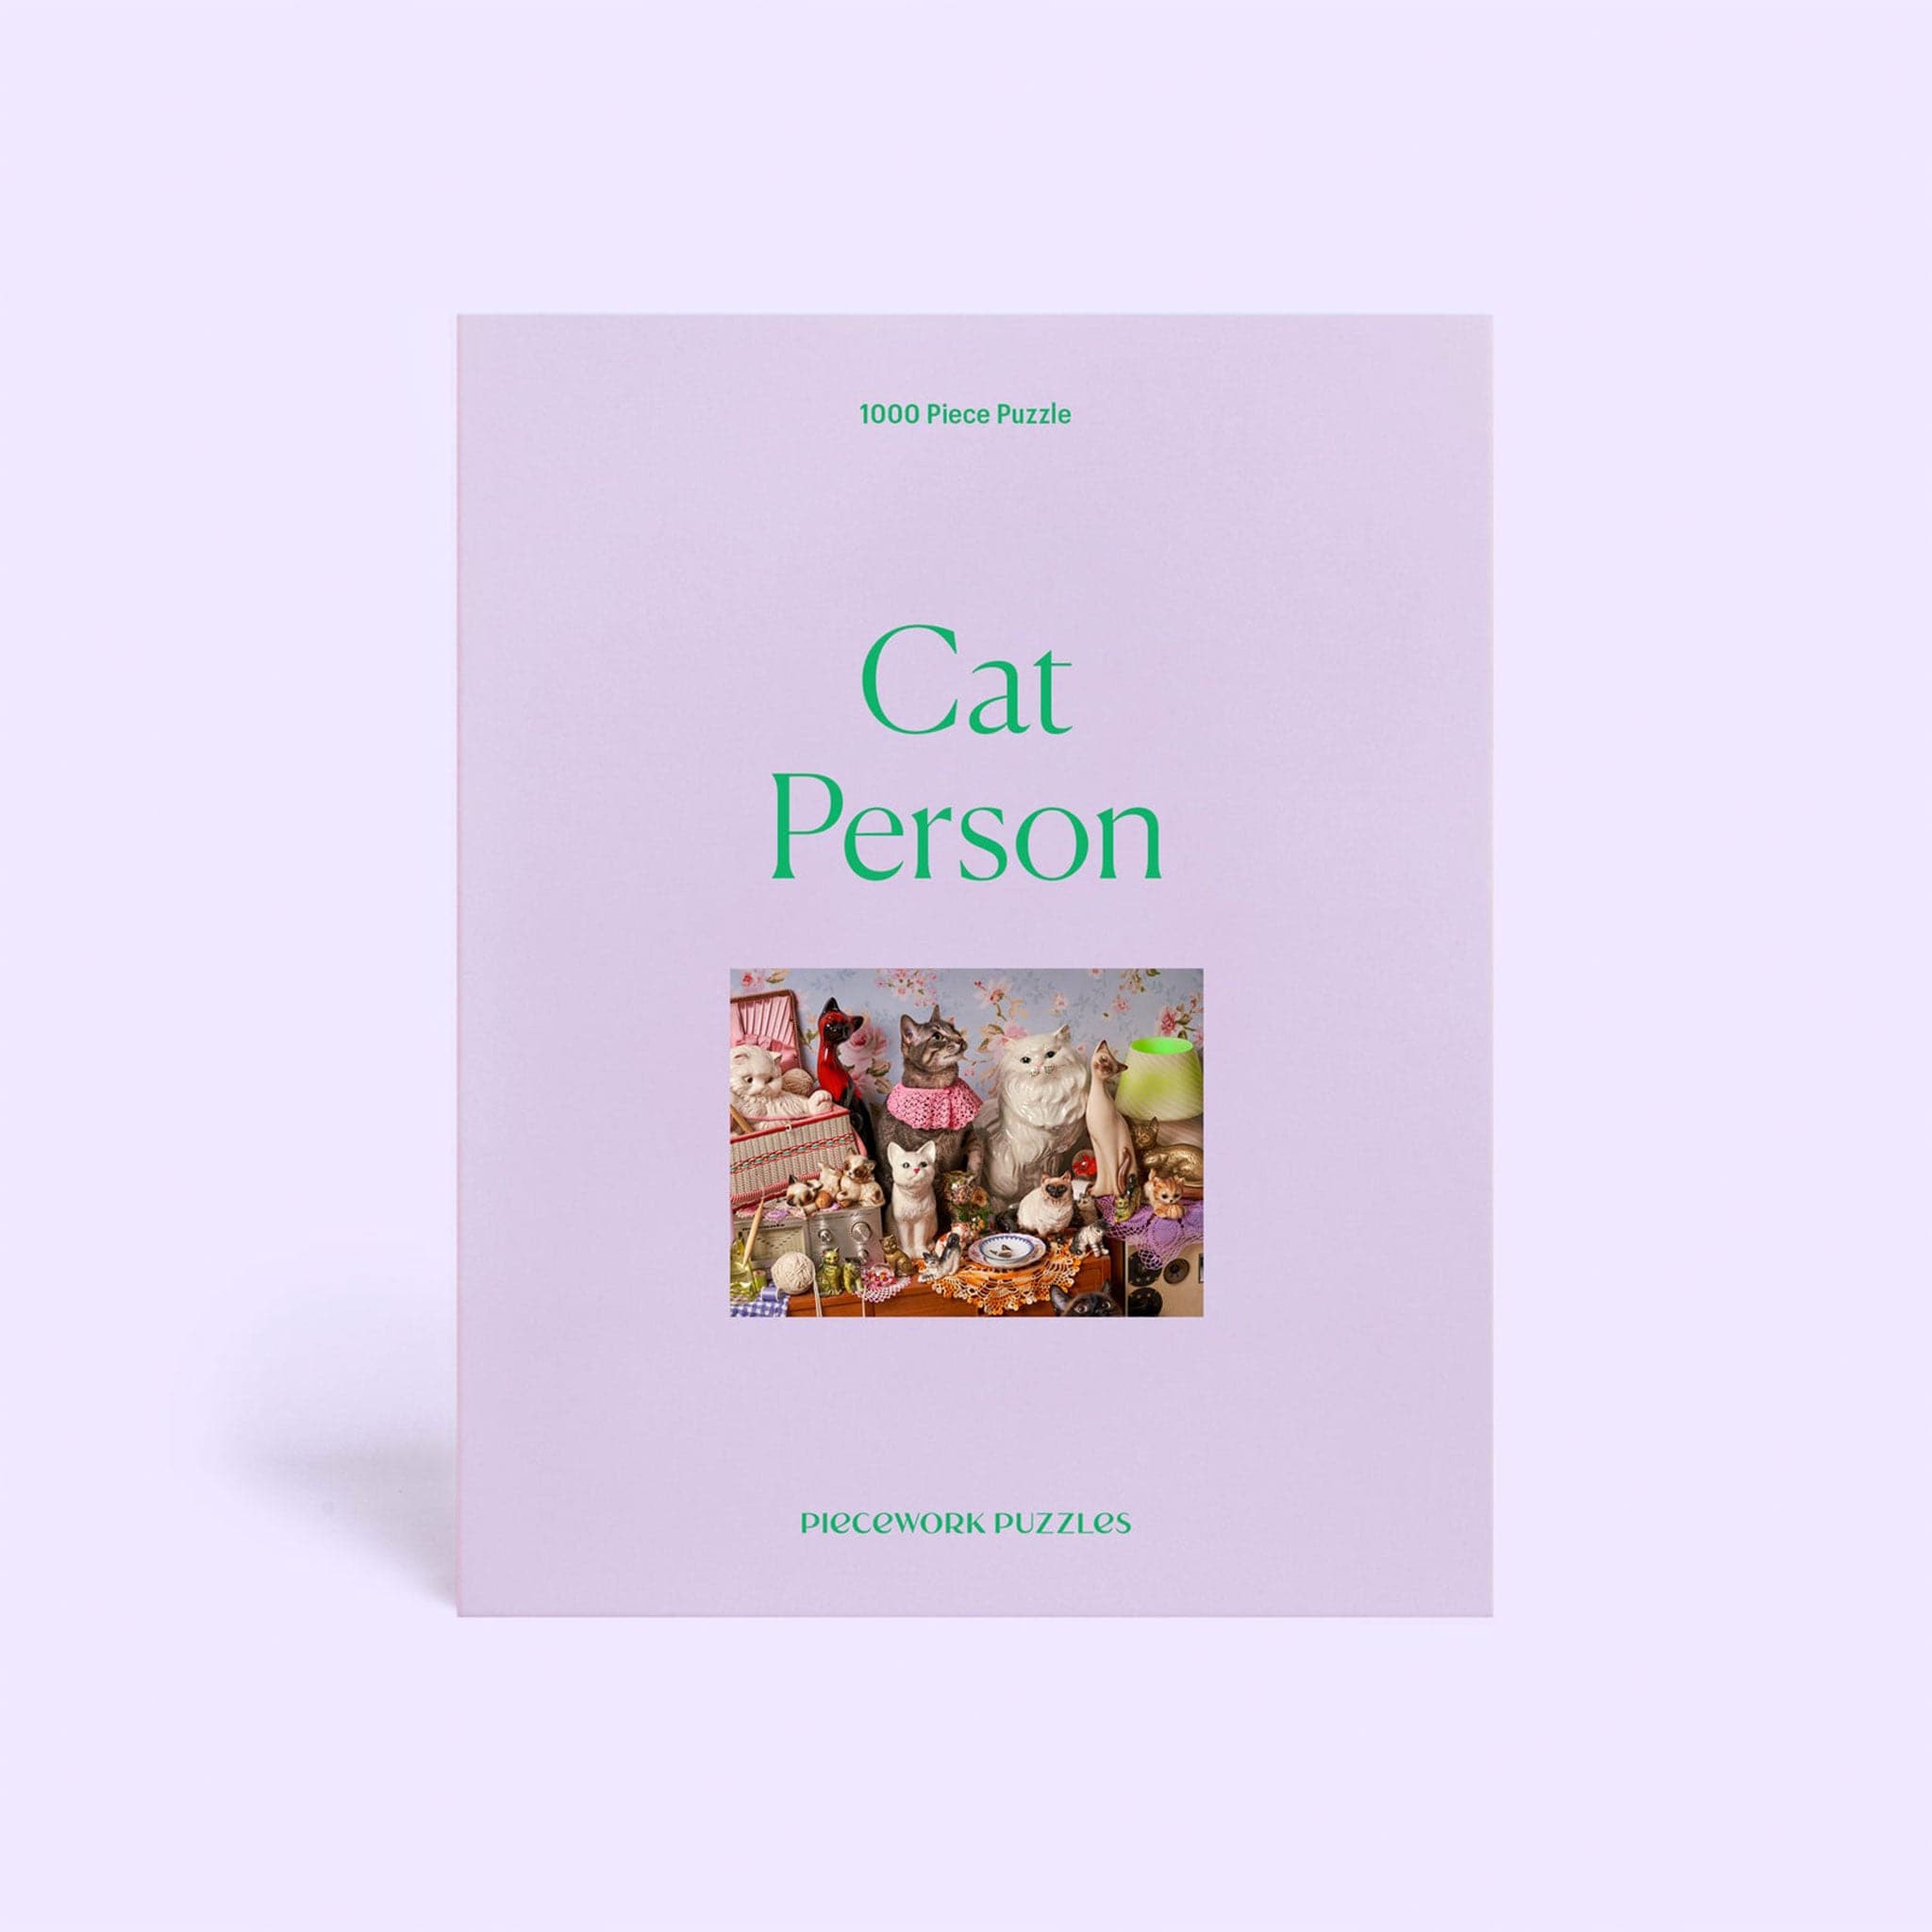 On a lavender background is a 1,000 piece puzzle box featuring the photo of the finished puzzle in the center along with green letters that read, &quot;Cat Person Piecework Puzzles&quot;.